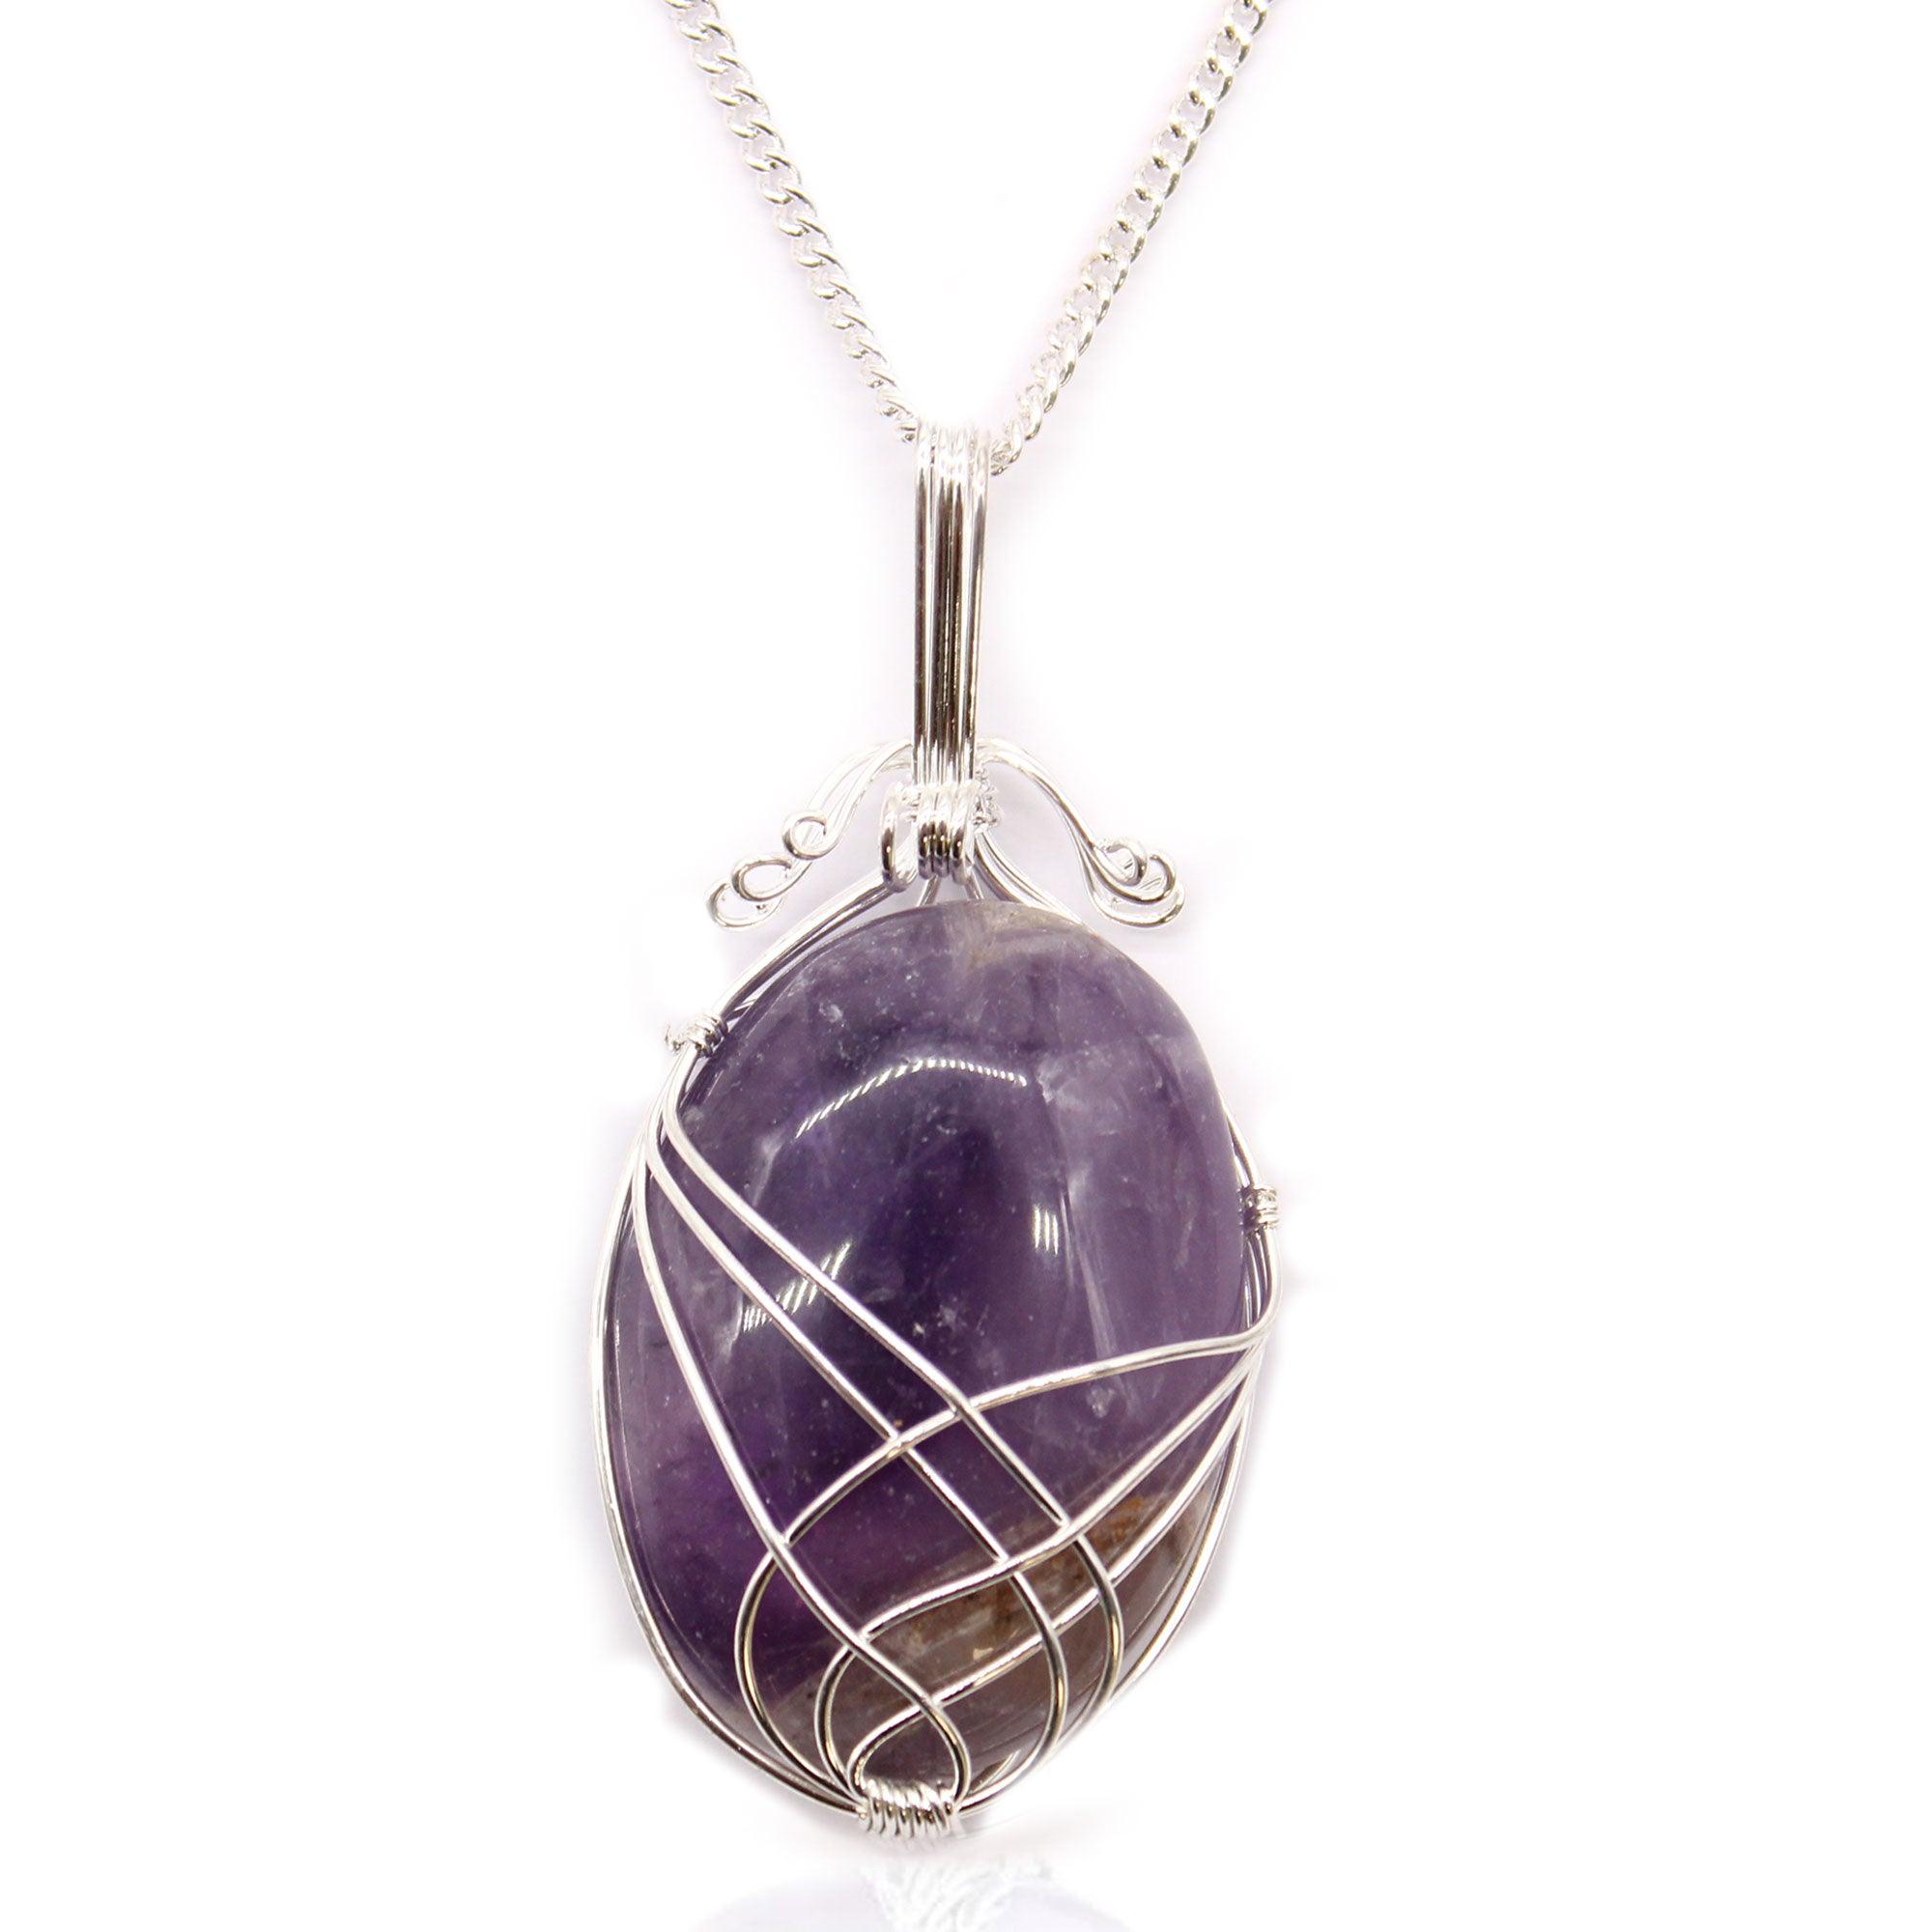 Swirl Wrapped Gemstone Necklace - Amethyst - Charming Spaces